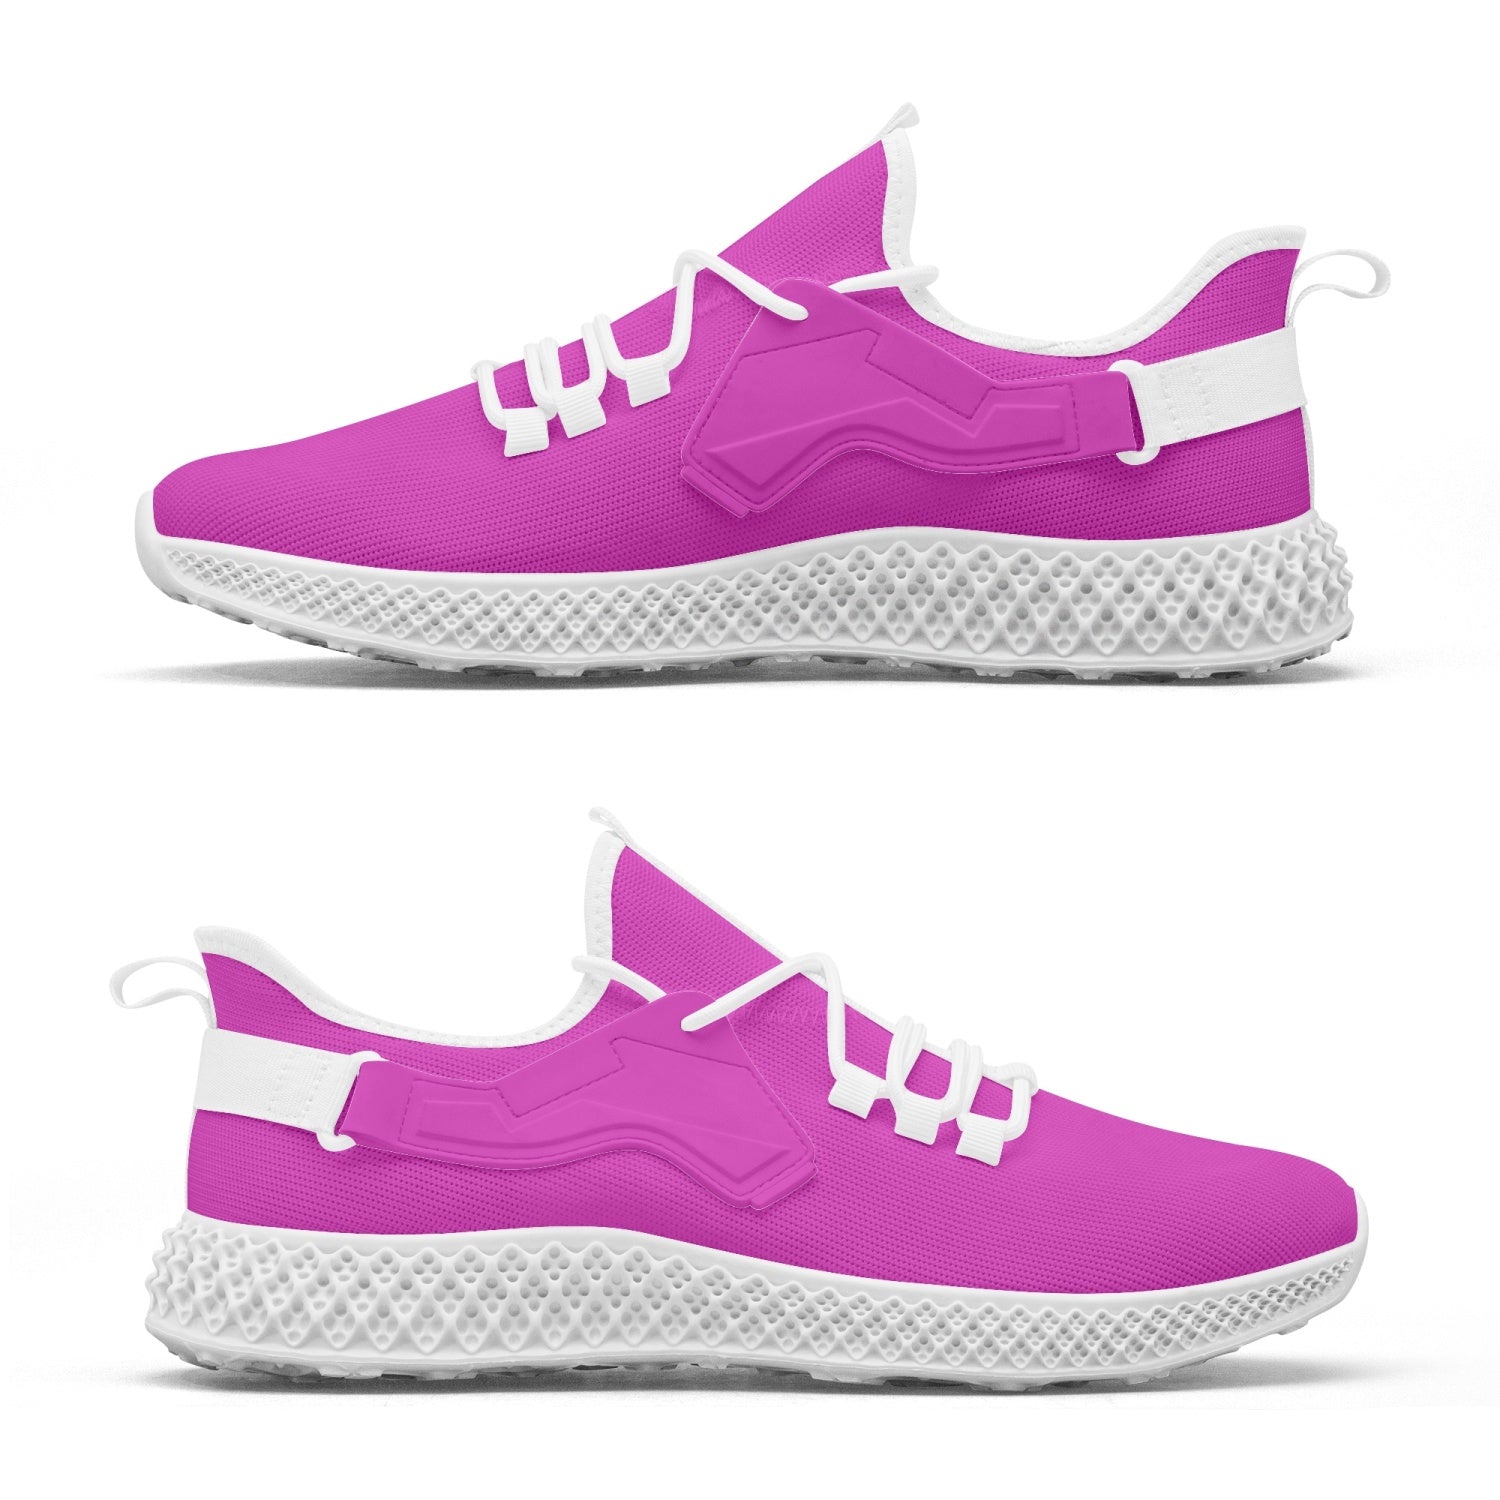 Unisex Mexican Pink Net Style Mesh Knit Sneakers